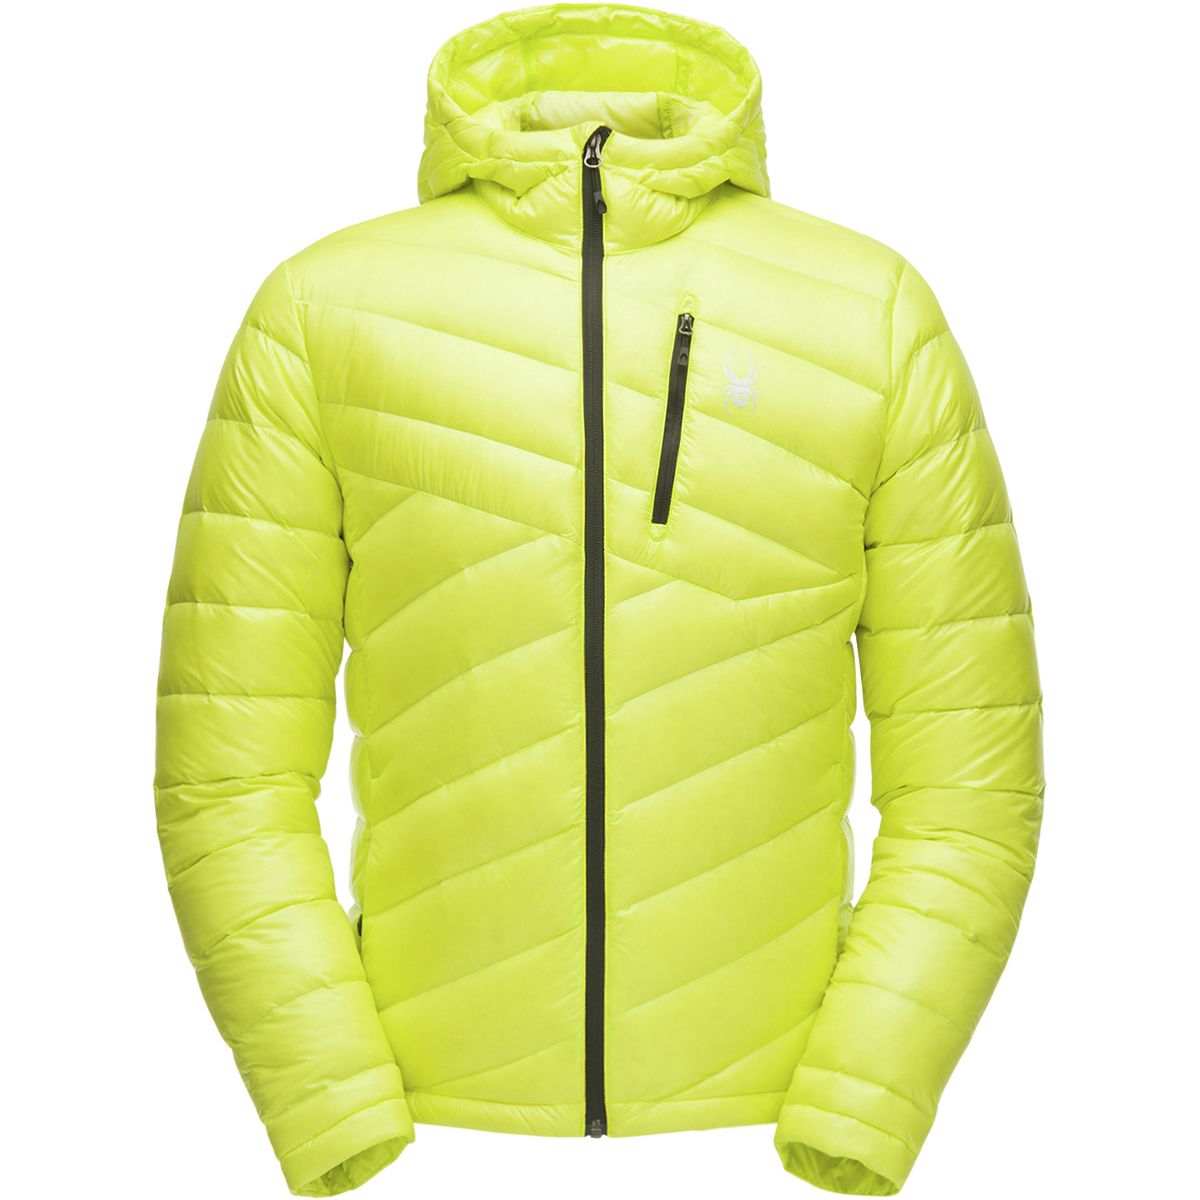 Spyder Syrround Hooded Down Jacket - Men's - Clothing